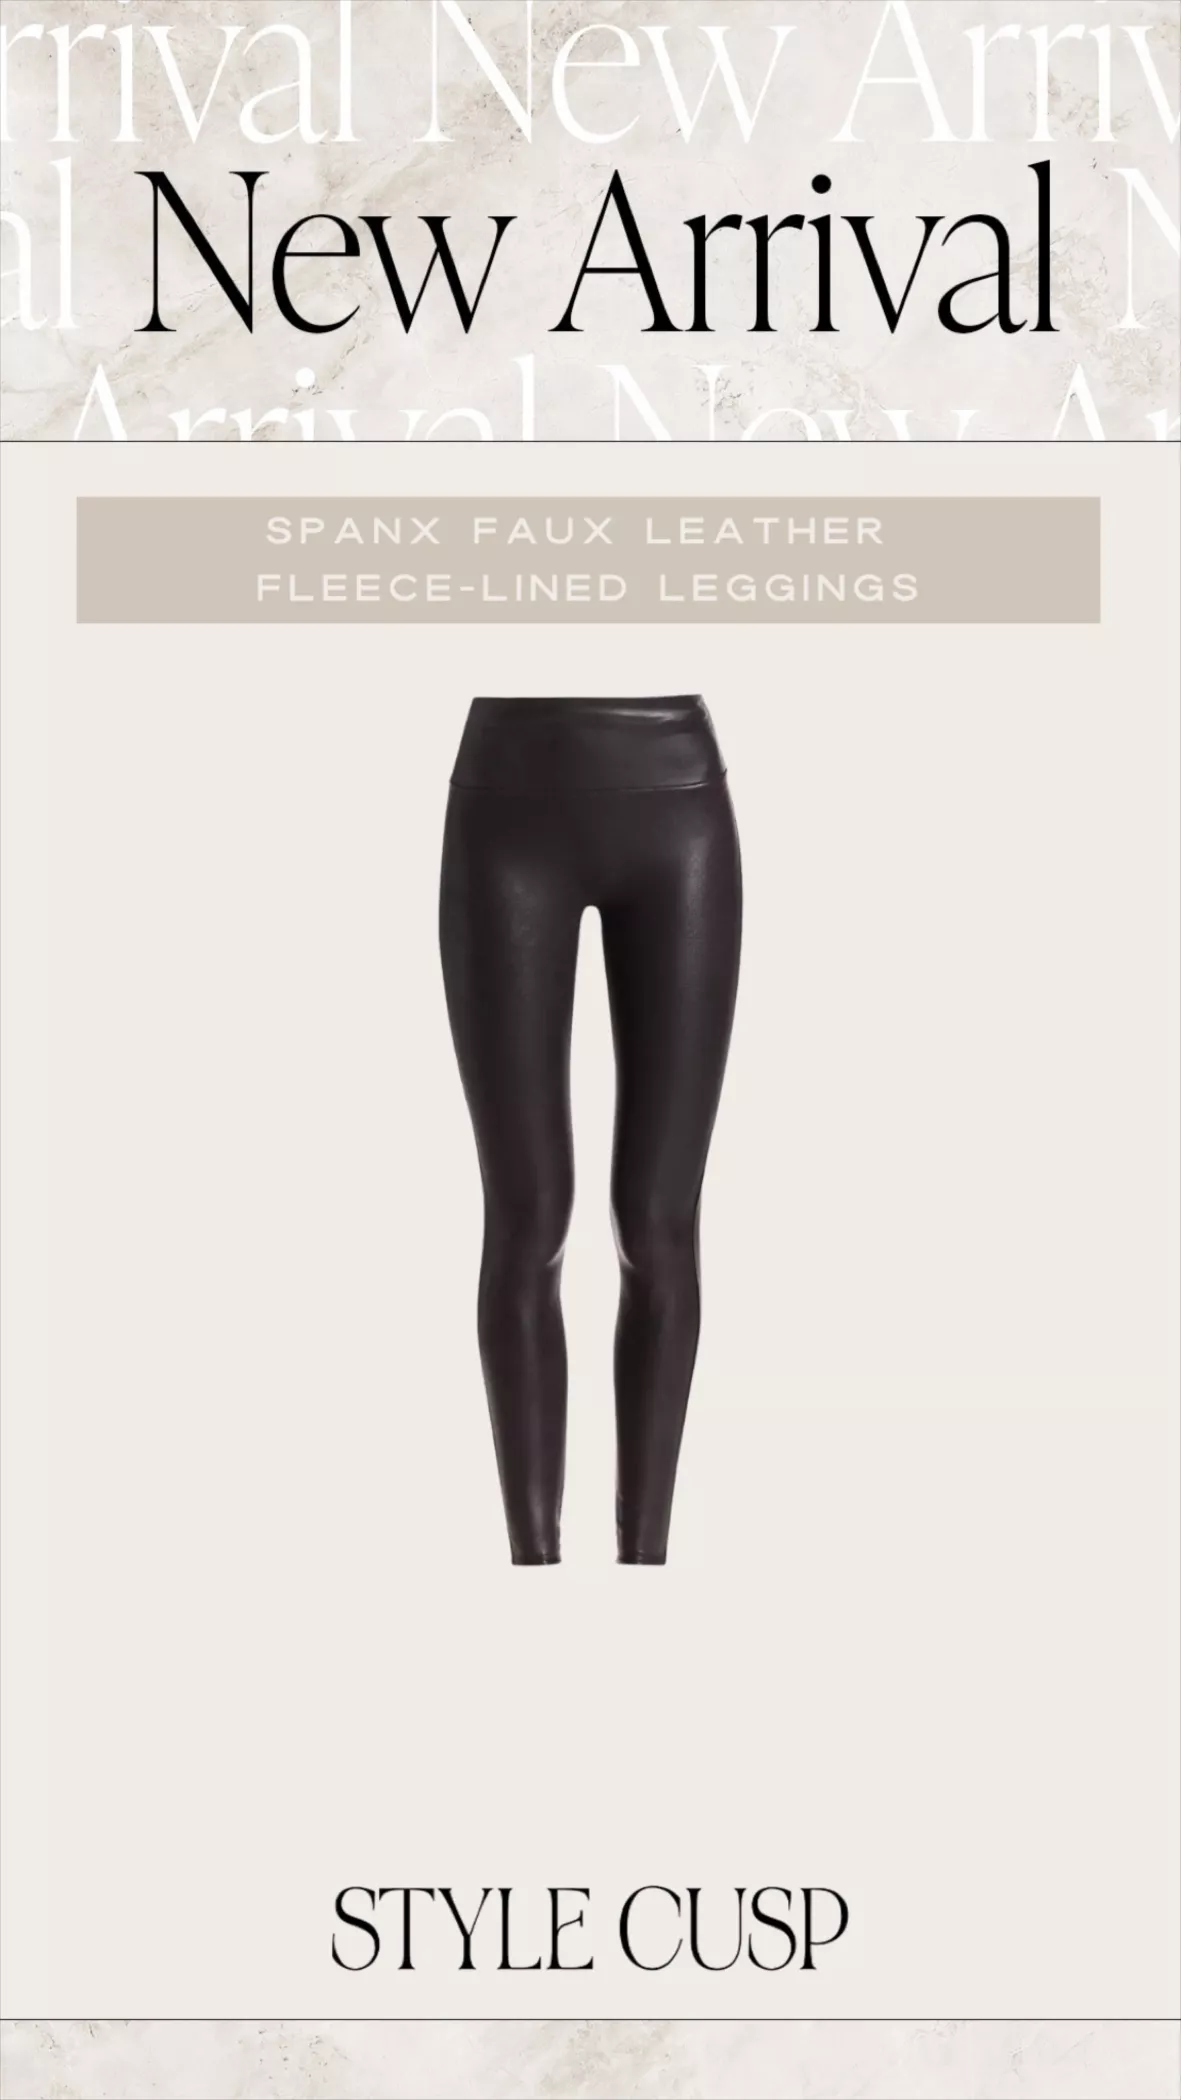 Spanx's New Fleece-Lined Faux-Leather Leggings Are Out Now